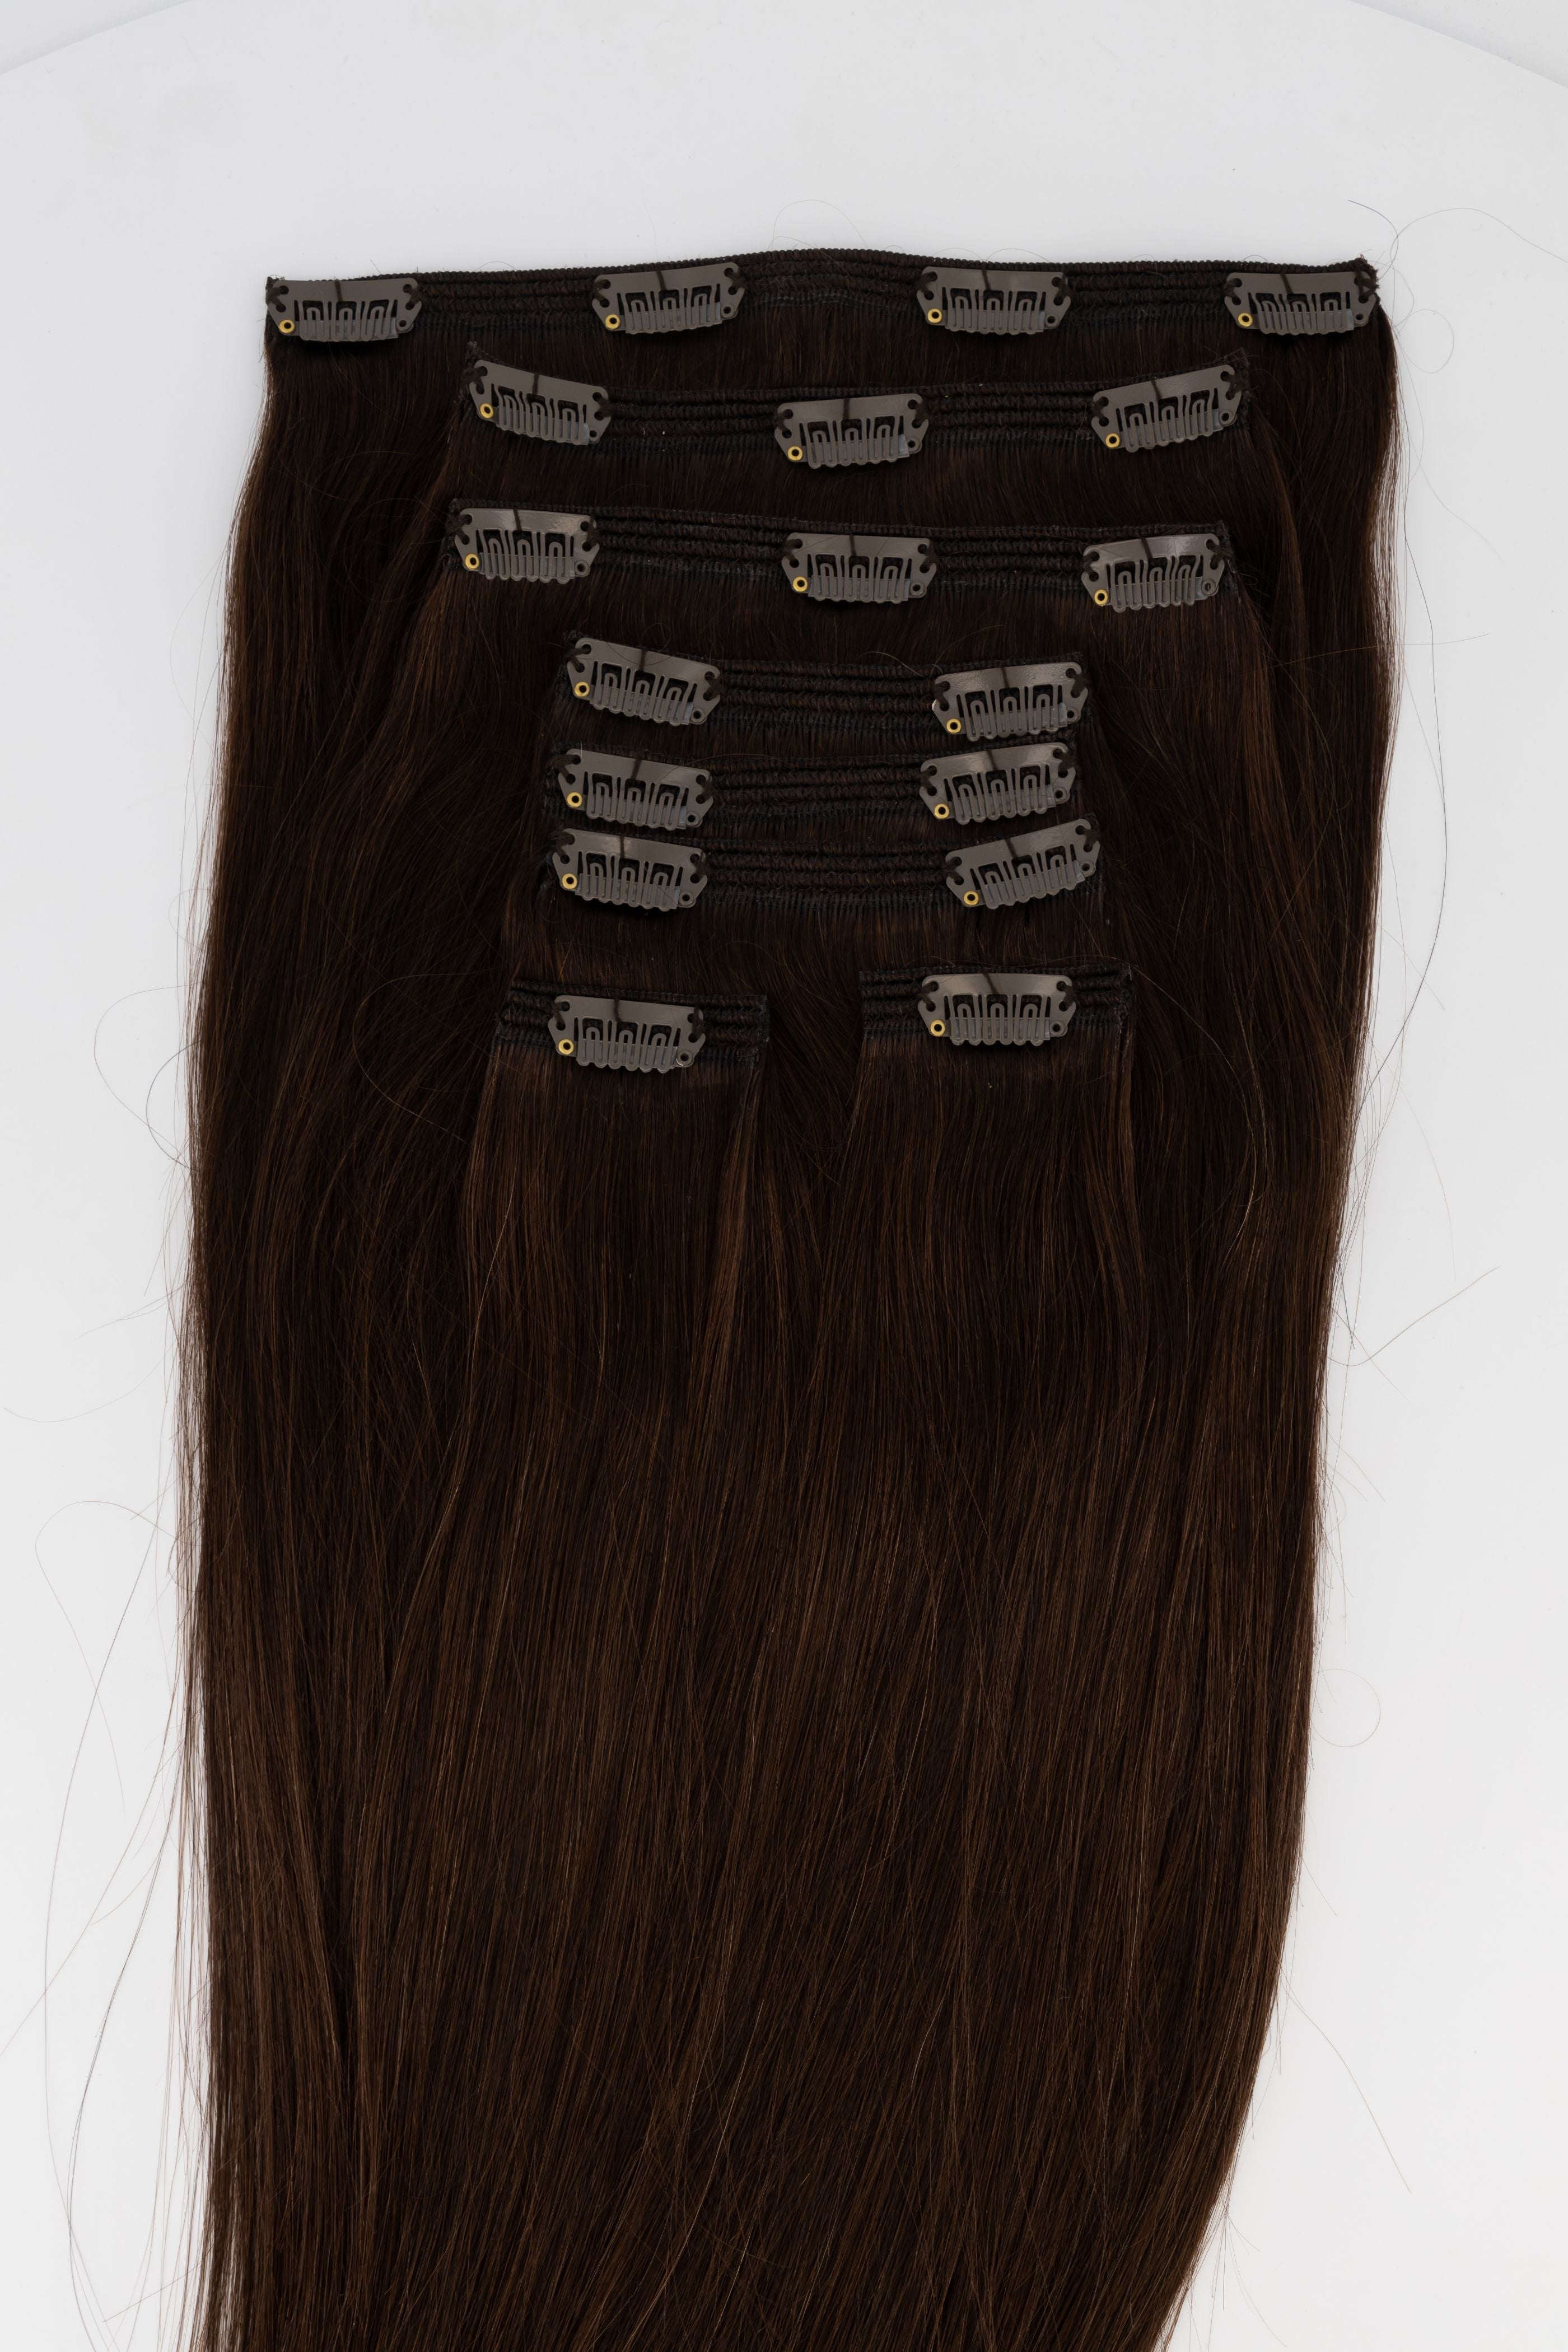 Frontrow clip-in hair extensions in dark brown